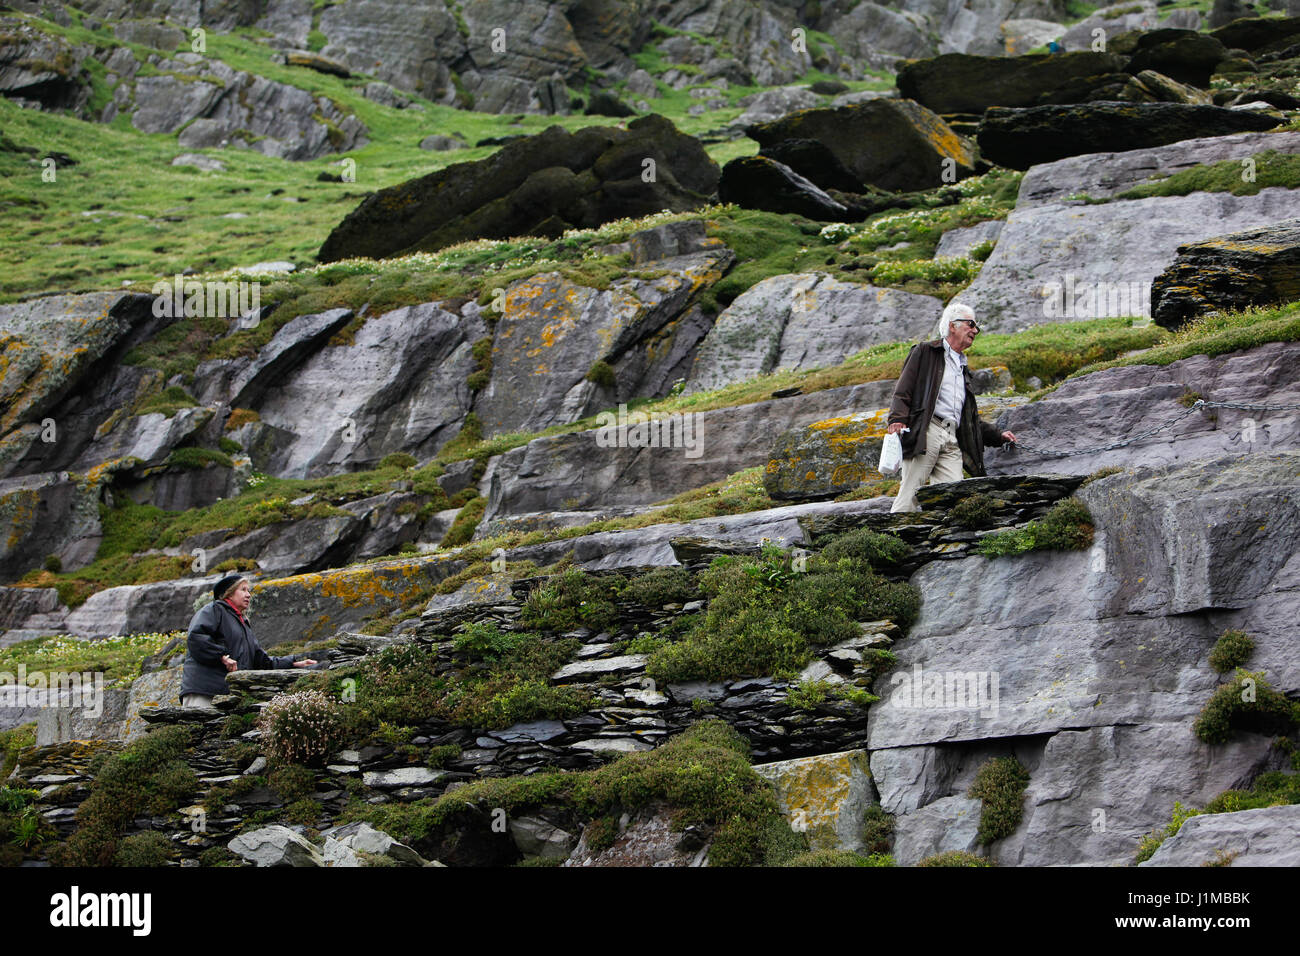 Walking the narrow stone path on Skellig Michael, County Kerry with a sheer drop on either side. Stock Photo